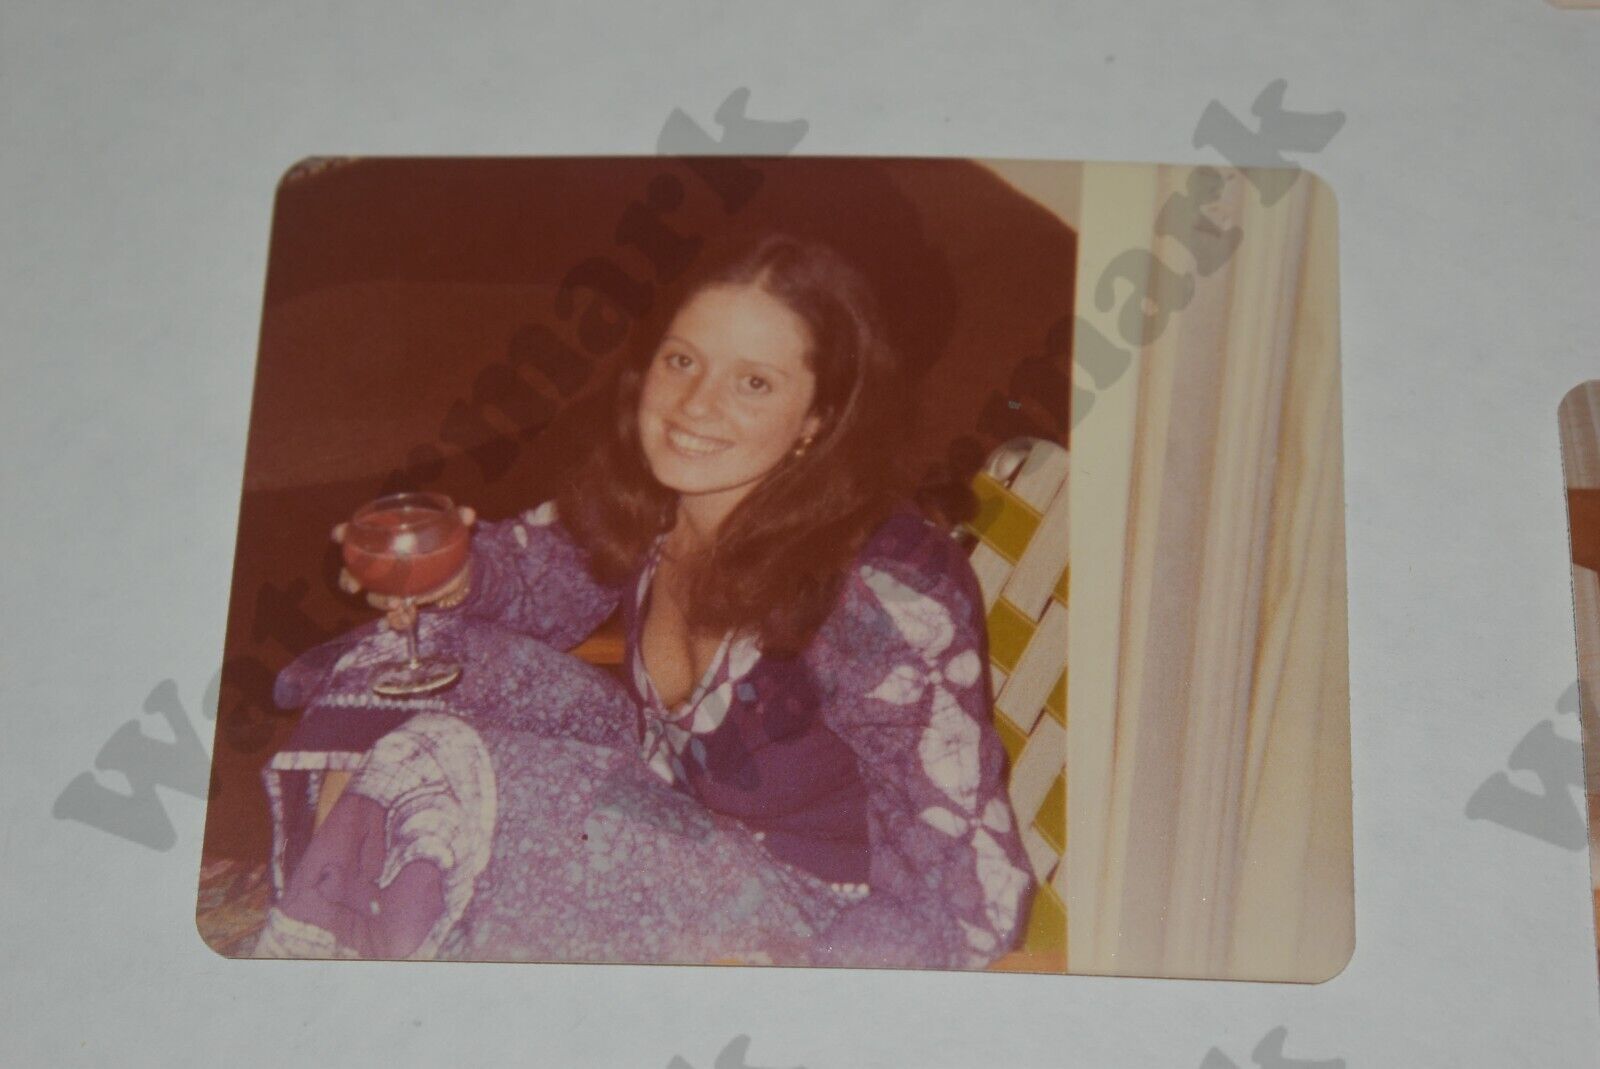 1970s candid busty brunette woman with drink VINTAGE PHOTOGRAPH  Hj